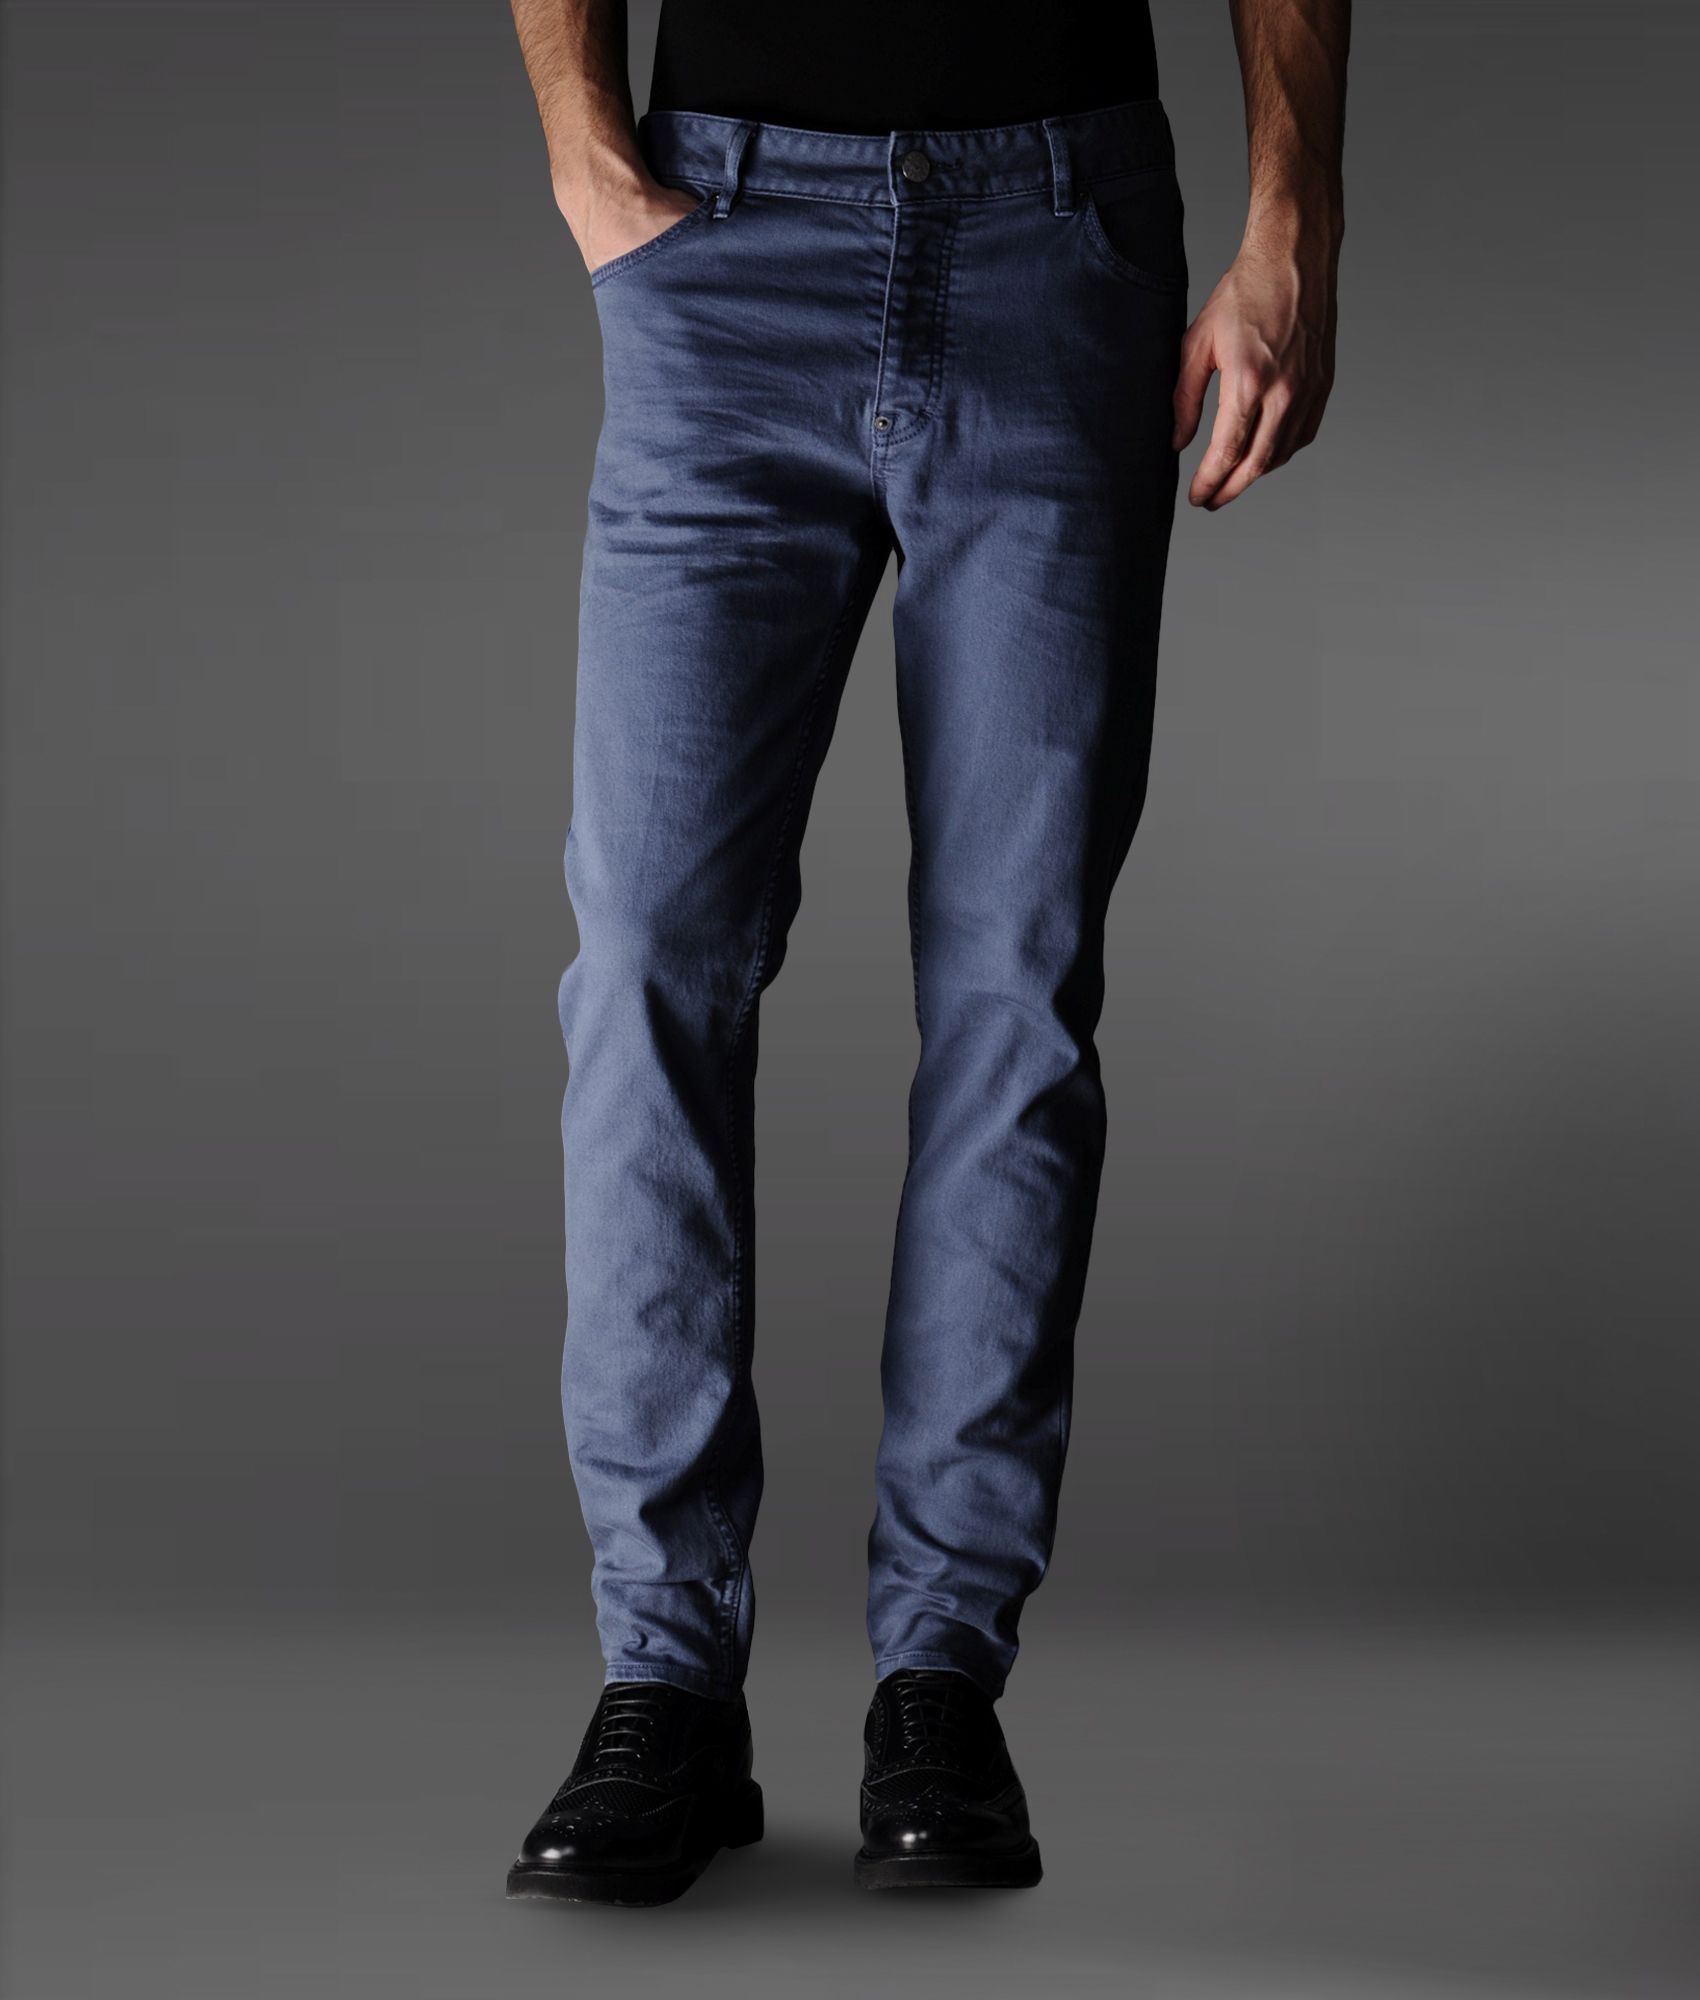 Lyst - Emporio Armani Skinny Carrot Jeans in Blue for Men